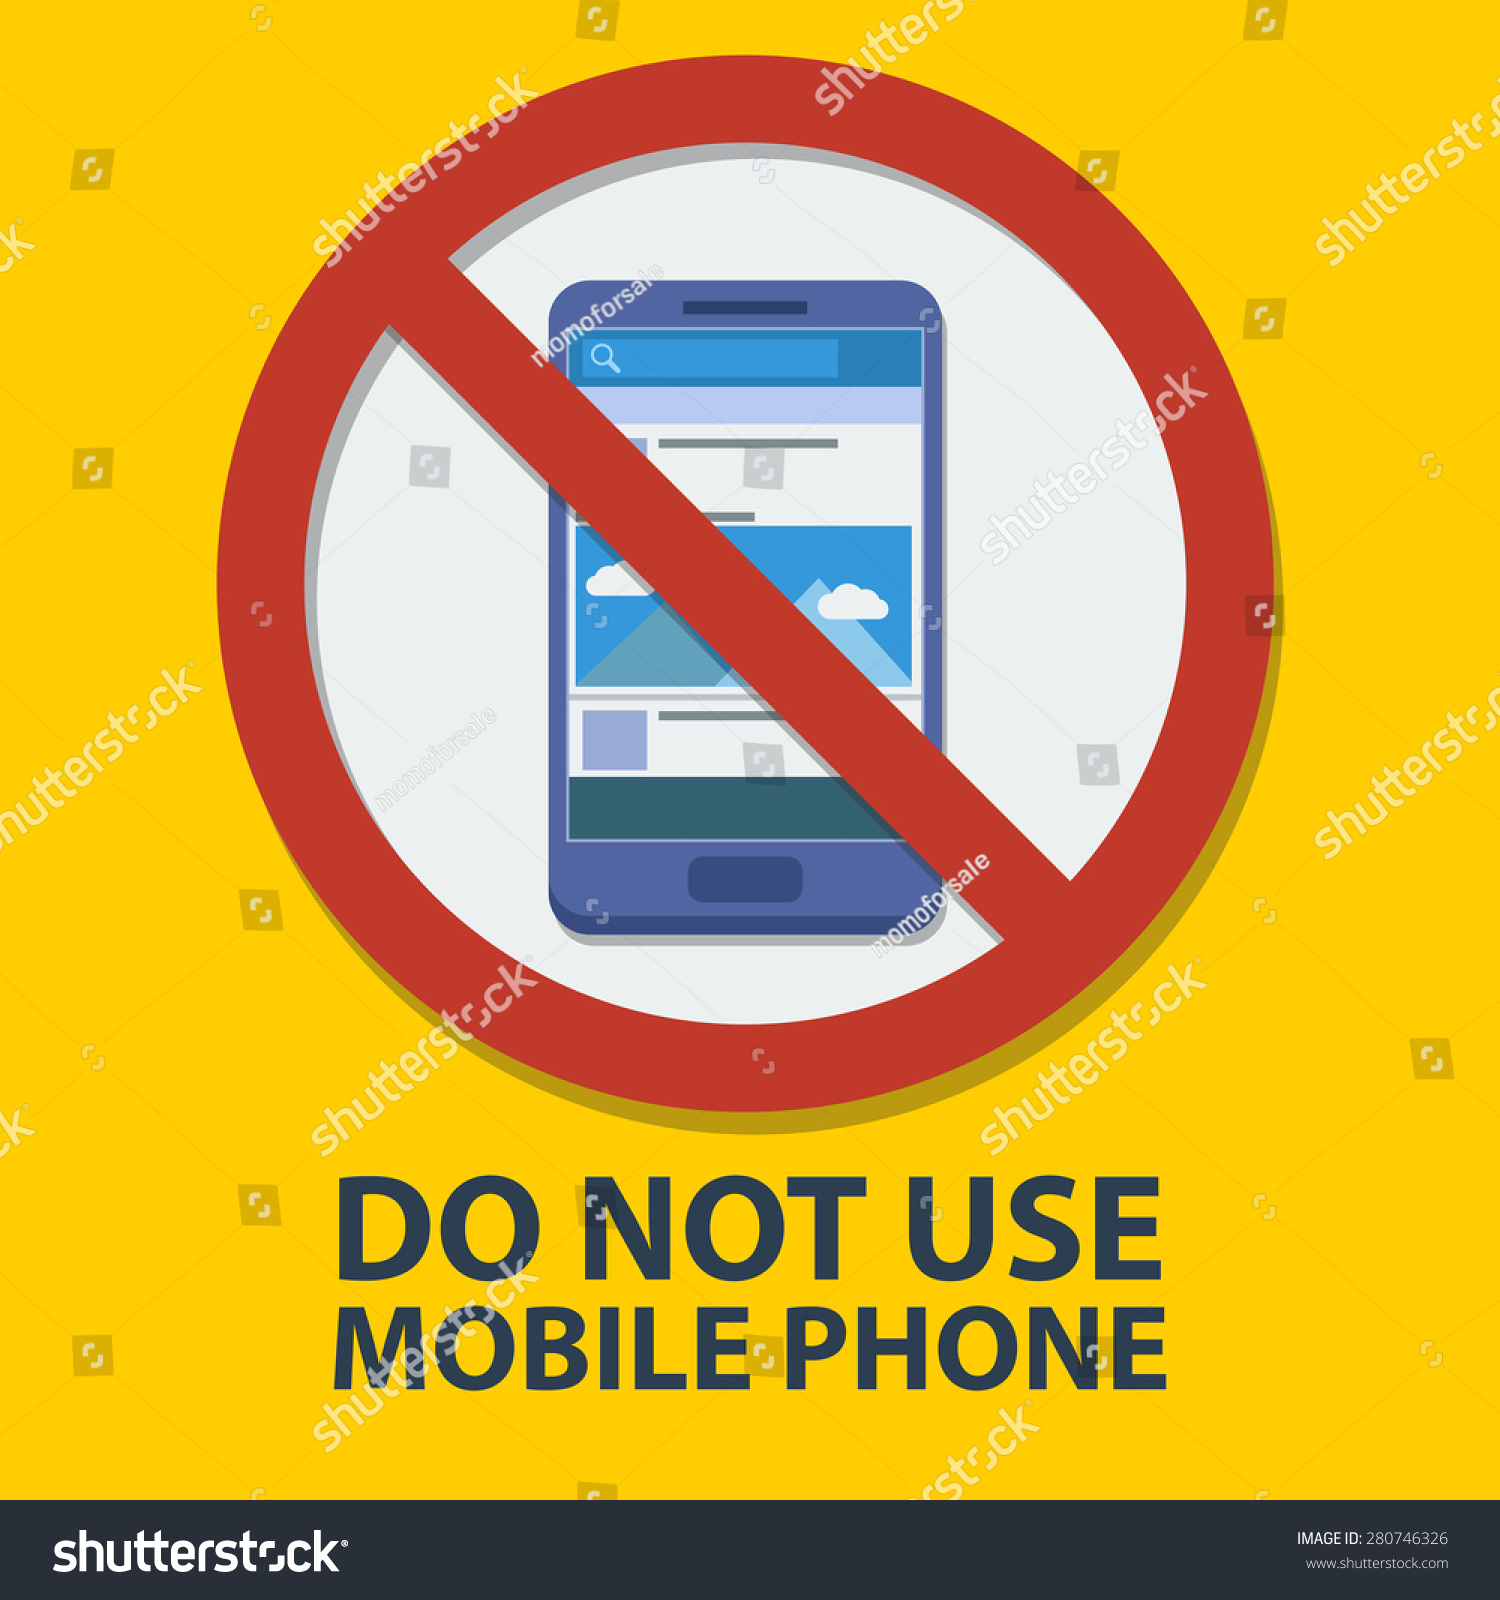 do-not-use-mobile-phone-sign-stock-vector-royalty-free-280746326